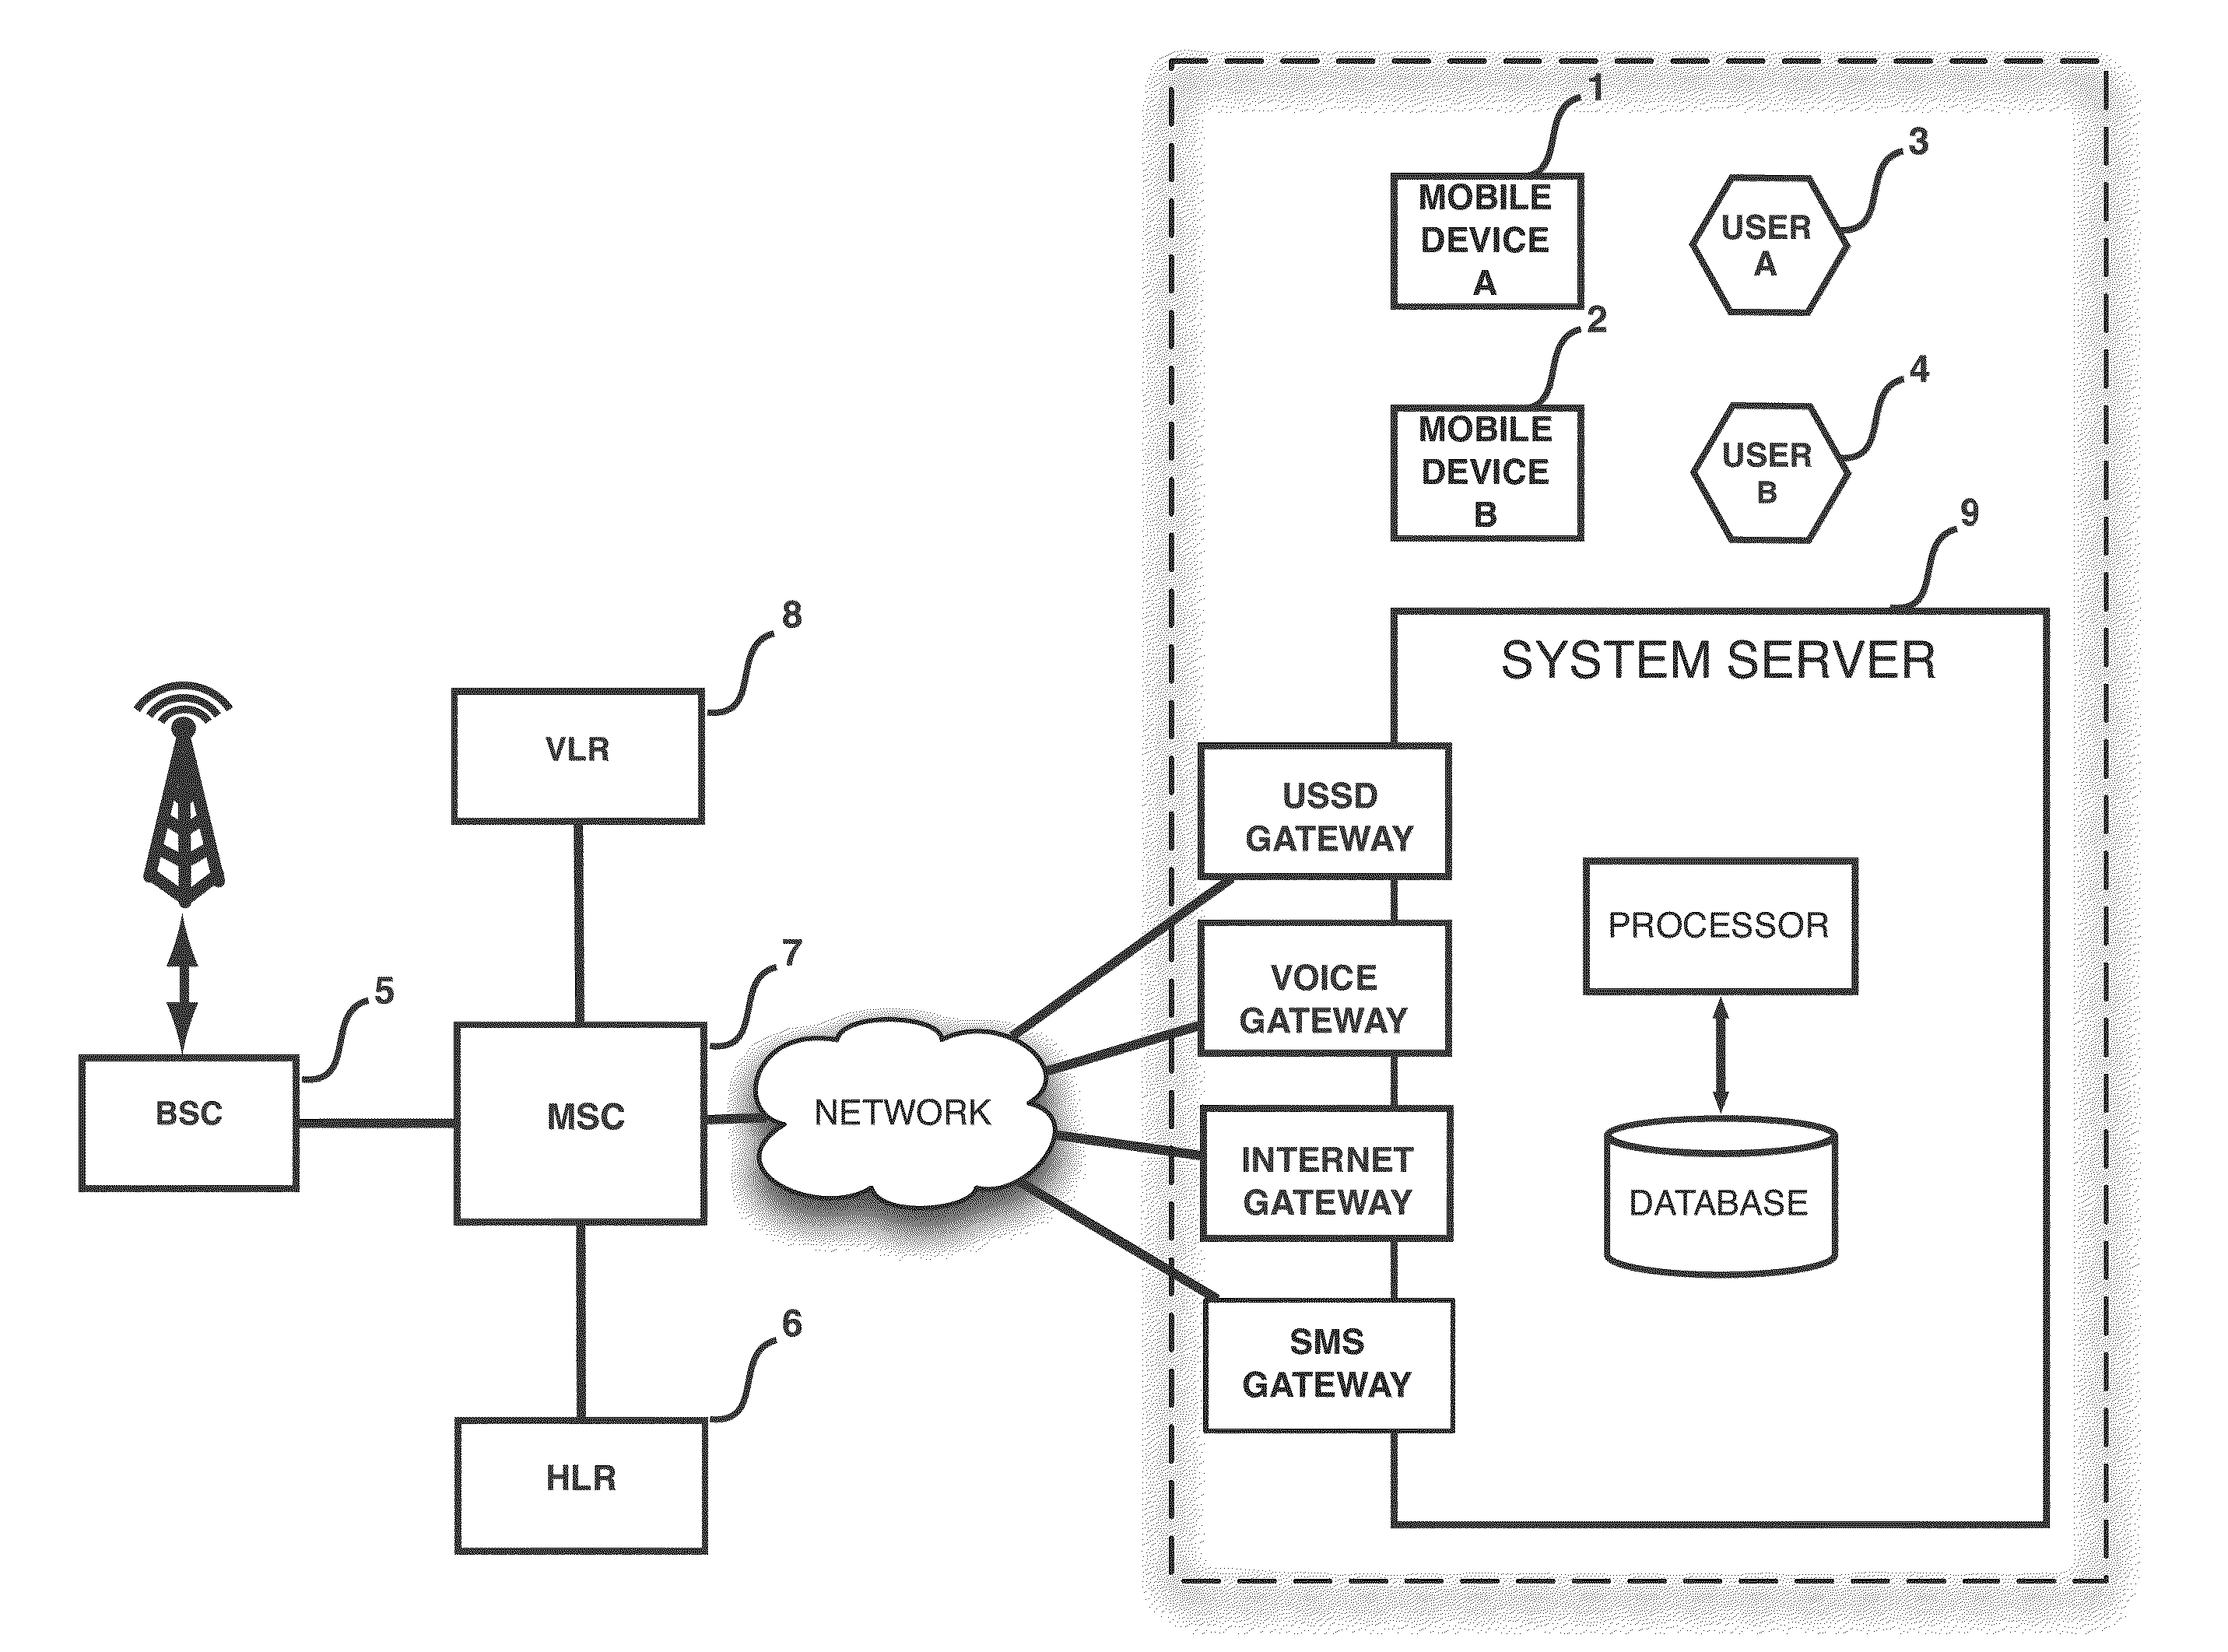 Method and system for enabling usage of mobile telephone services on a donor device